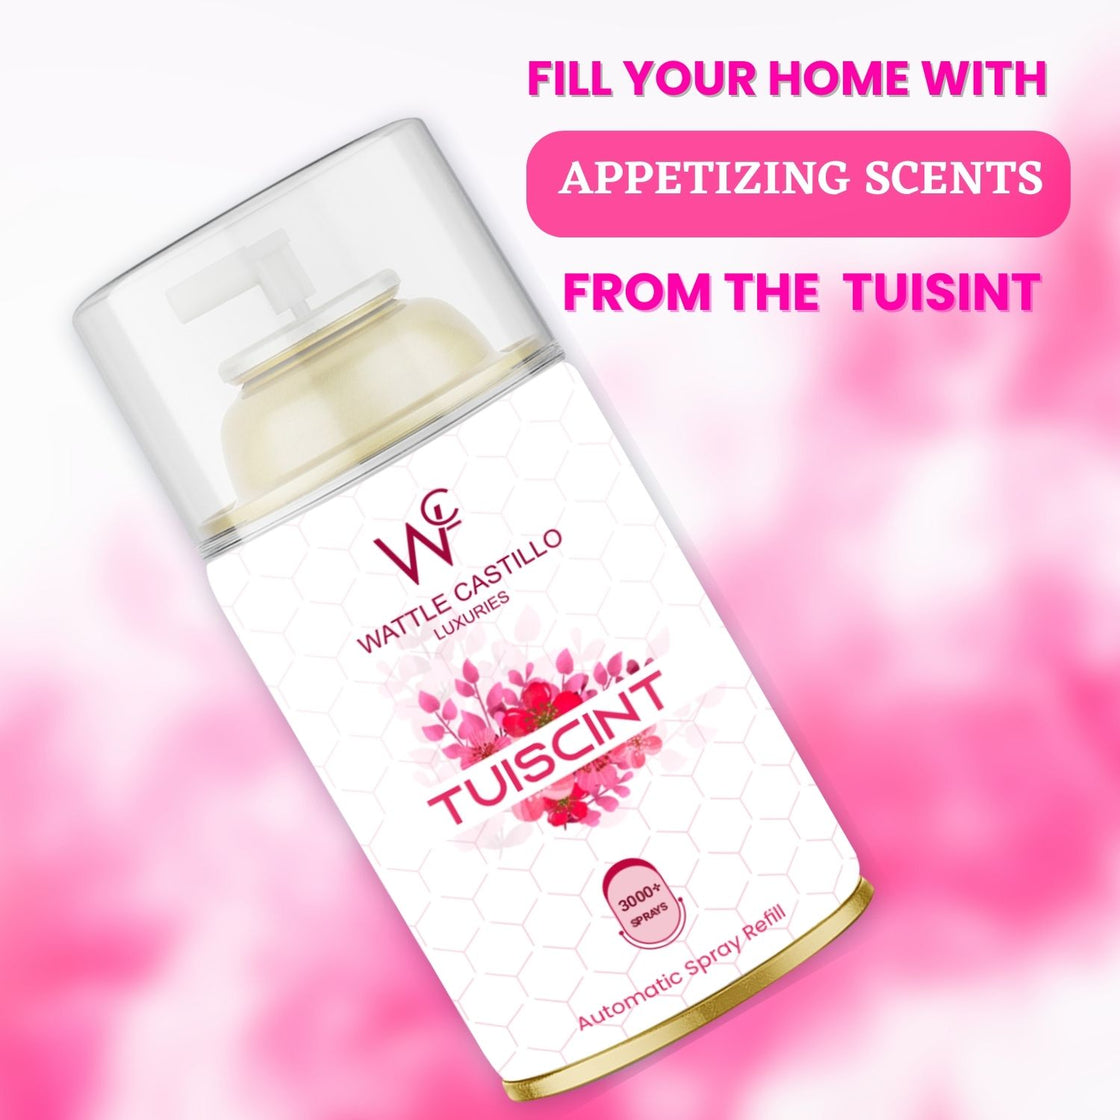 Wattle Castillo Tuiscint Automatic Room Fresheners Refill (265ml) & 3000+ Sprays Guaranteed Lasts up to 80 days